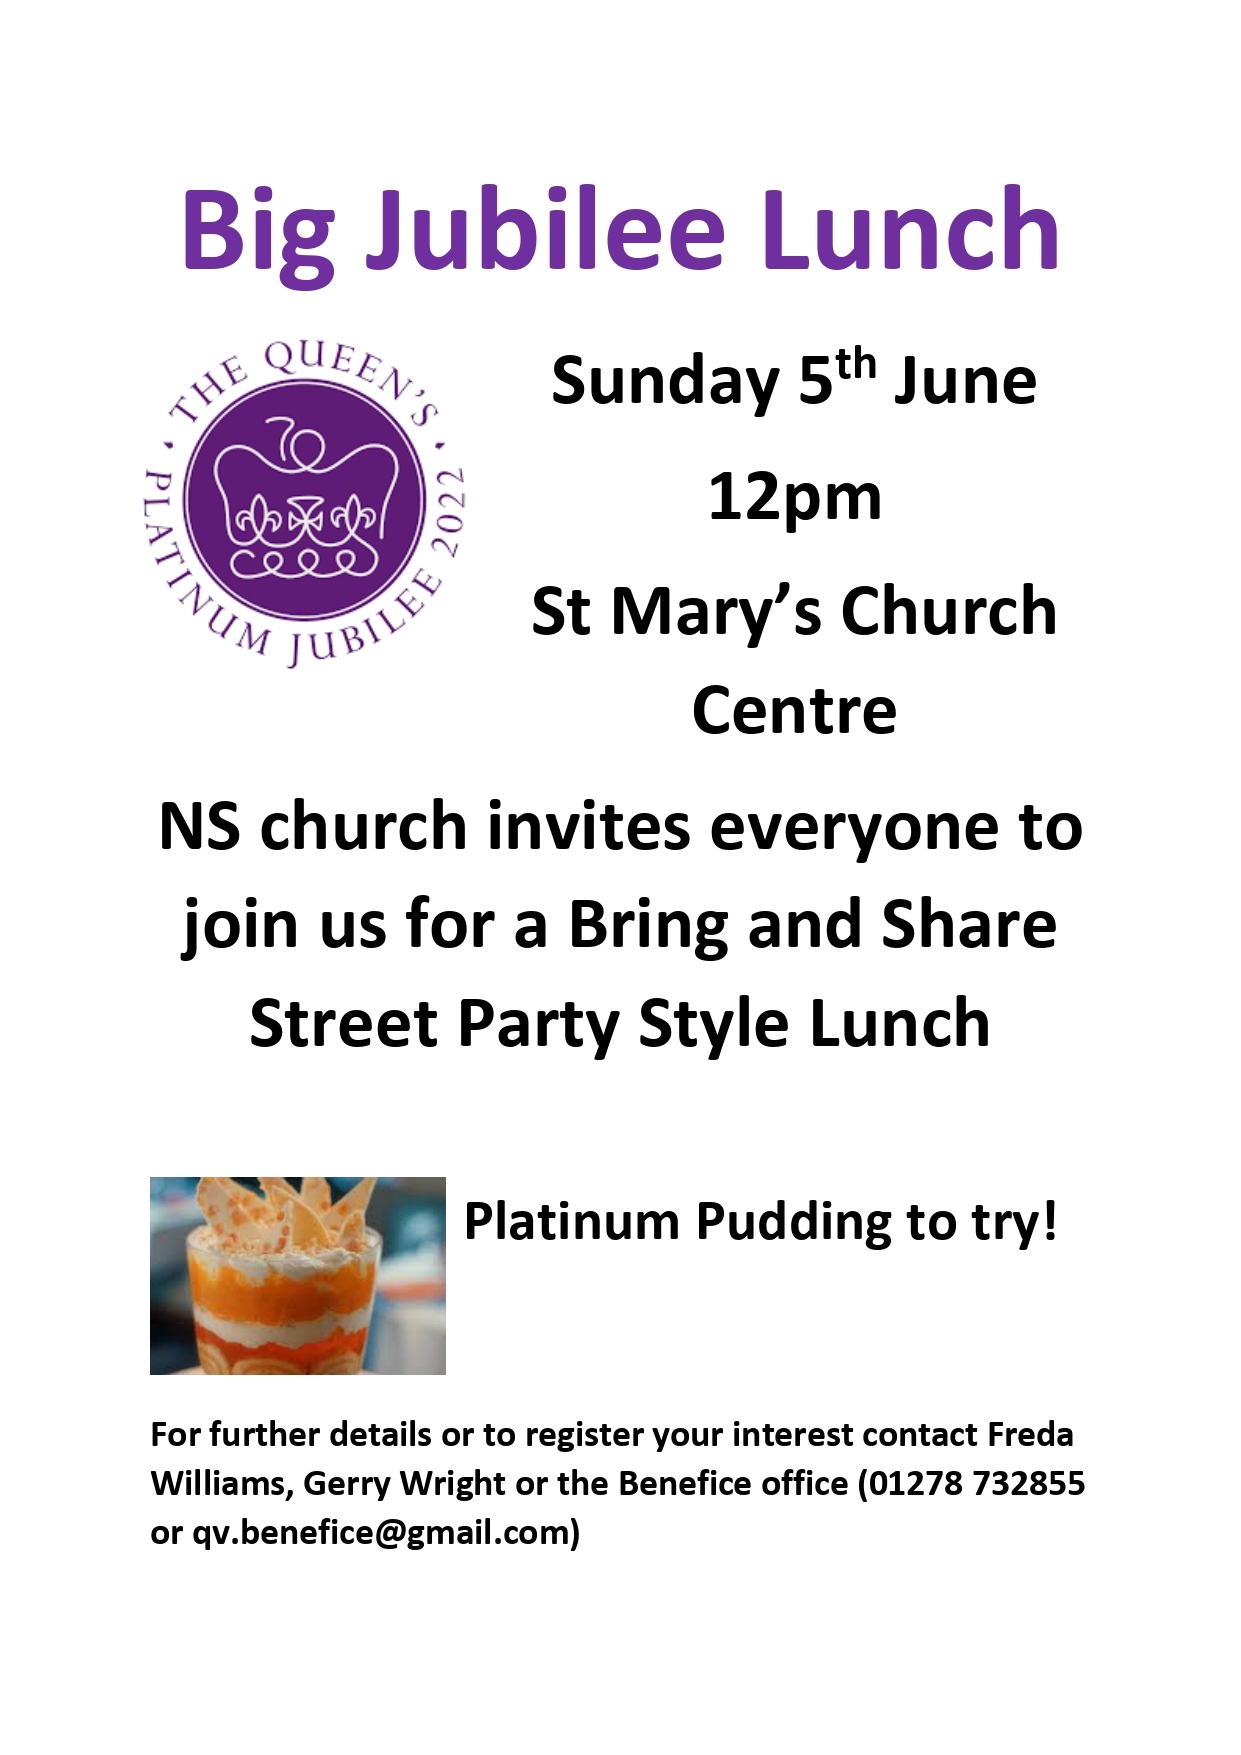 Bring and Share Jubilee Lunch @ St Marys Church Centre